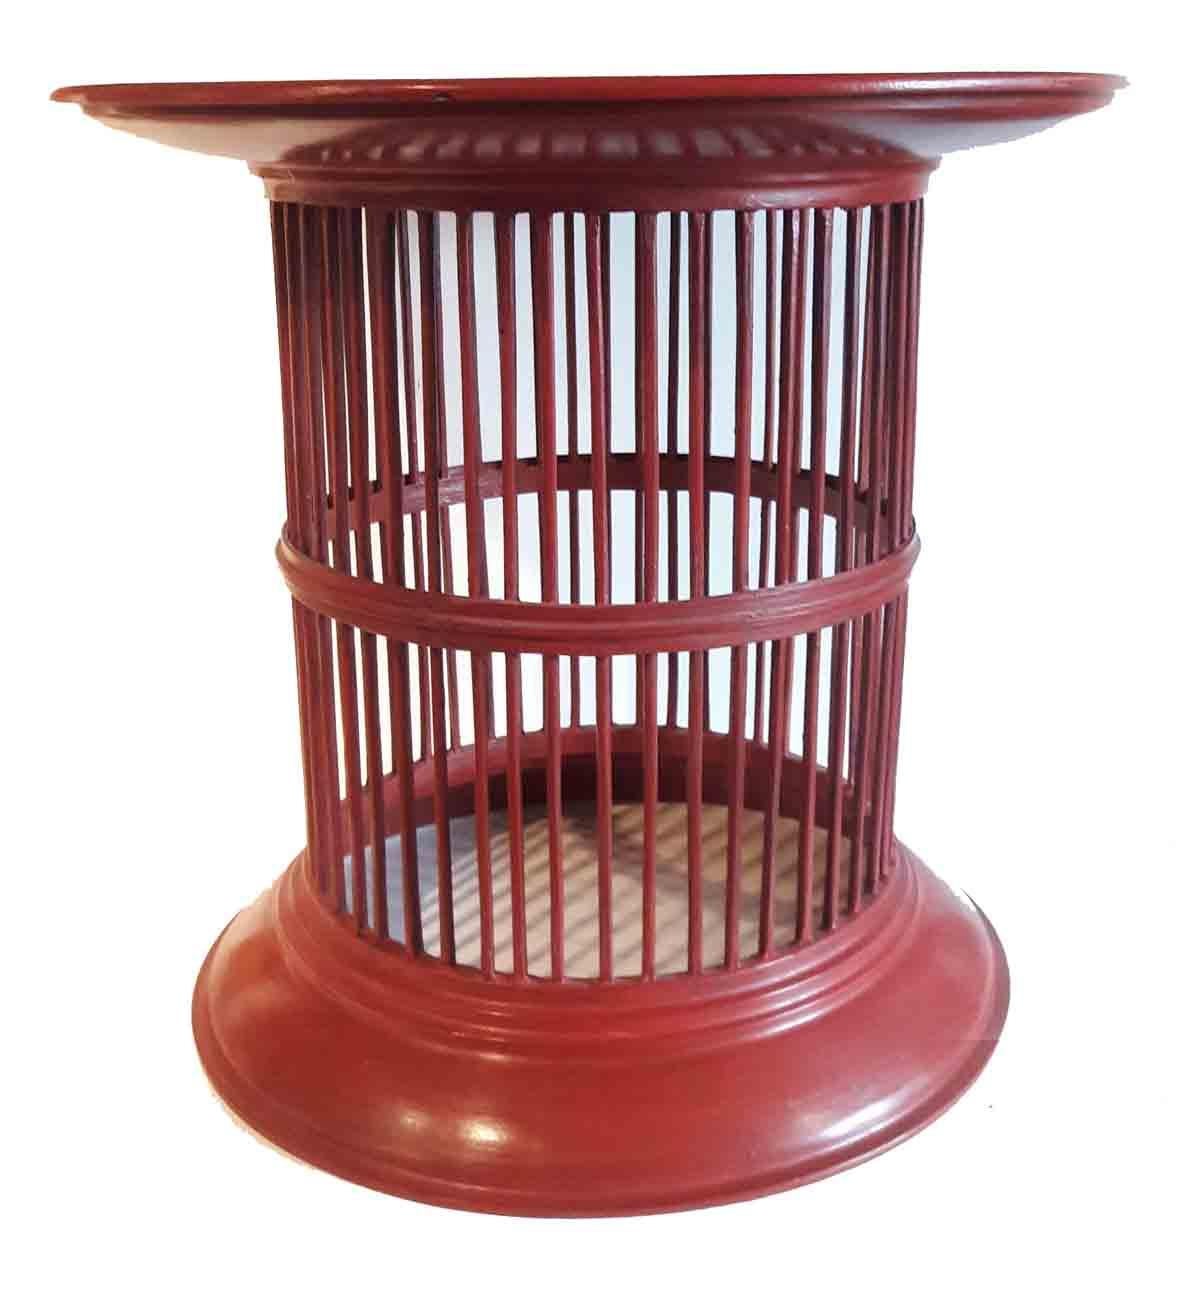 A lacquered bamboo drum table from Thailand, Contemporary. Lightweight, yet sturdy, these tables can offer a touch of eye-catching color to any room with an eclectic decor. Available in red and green.